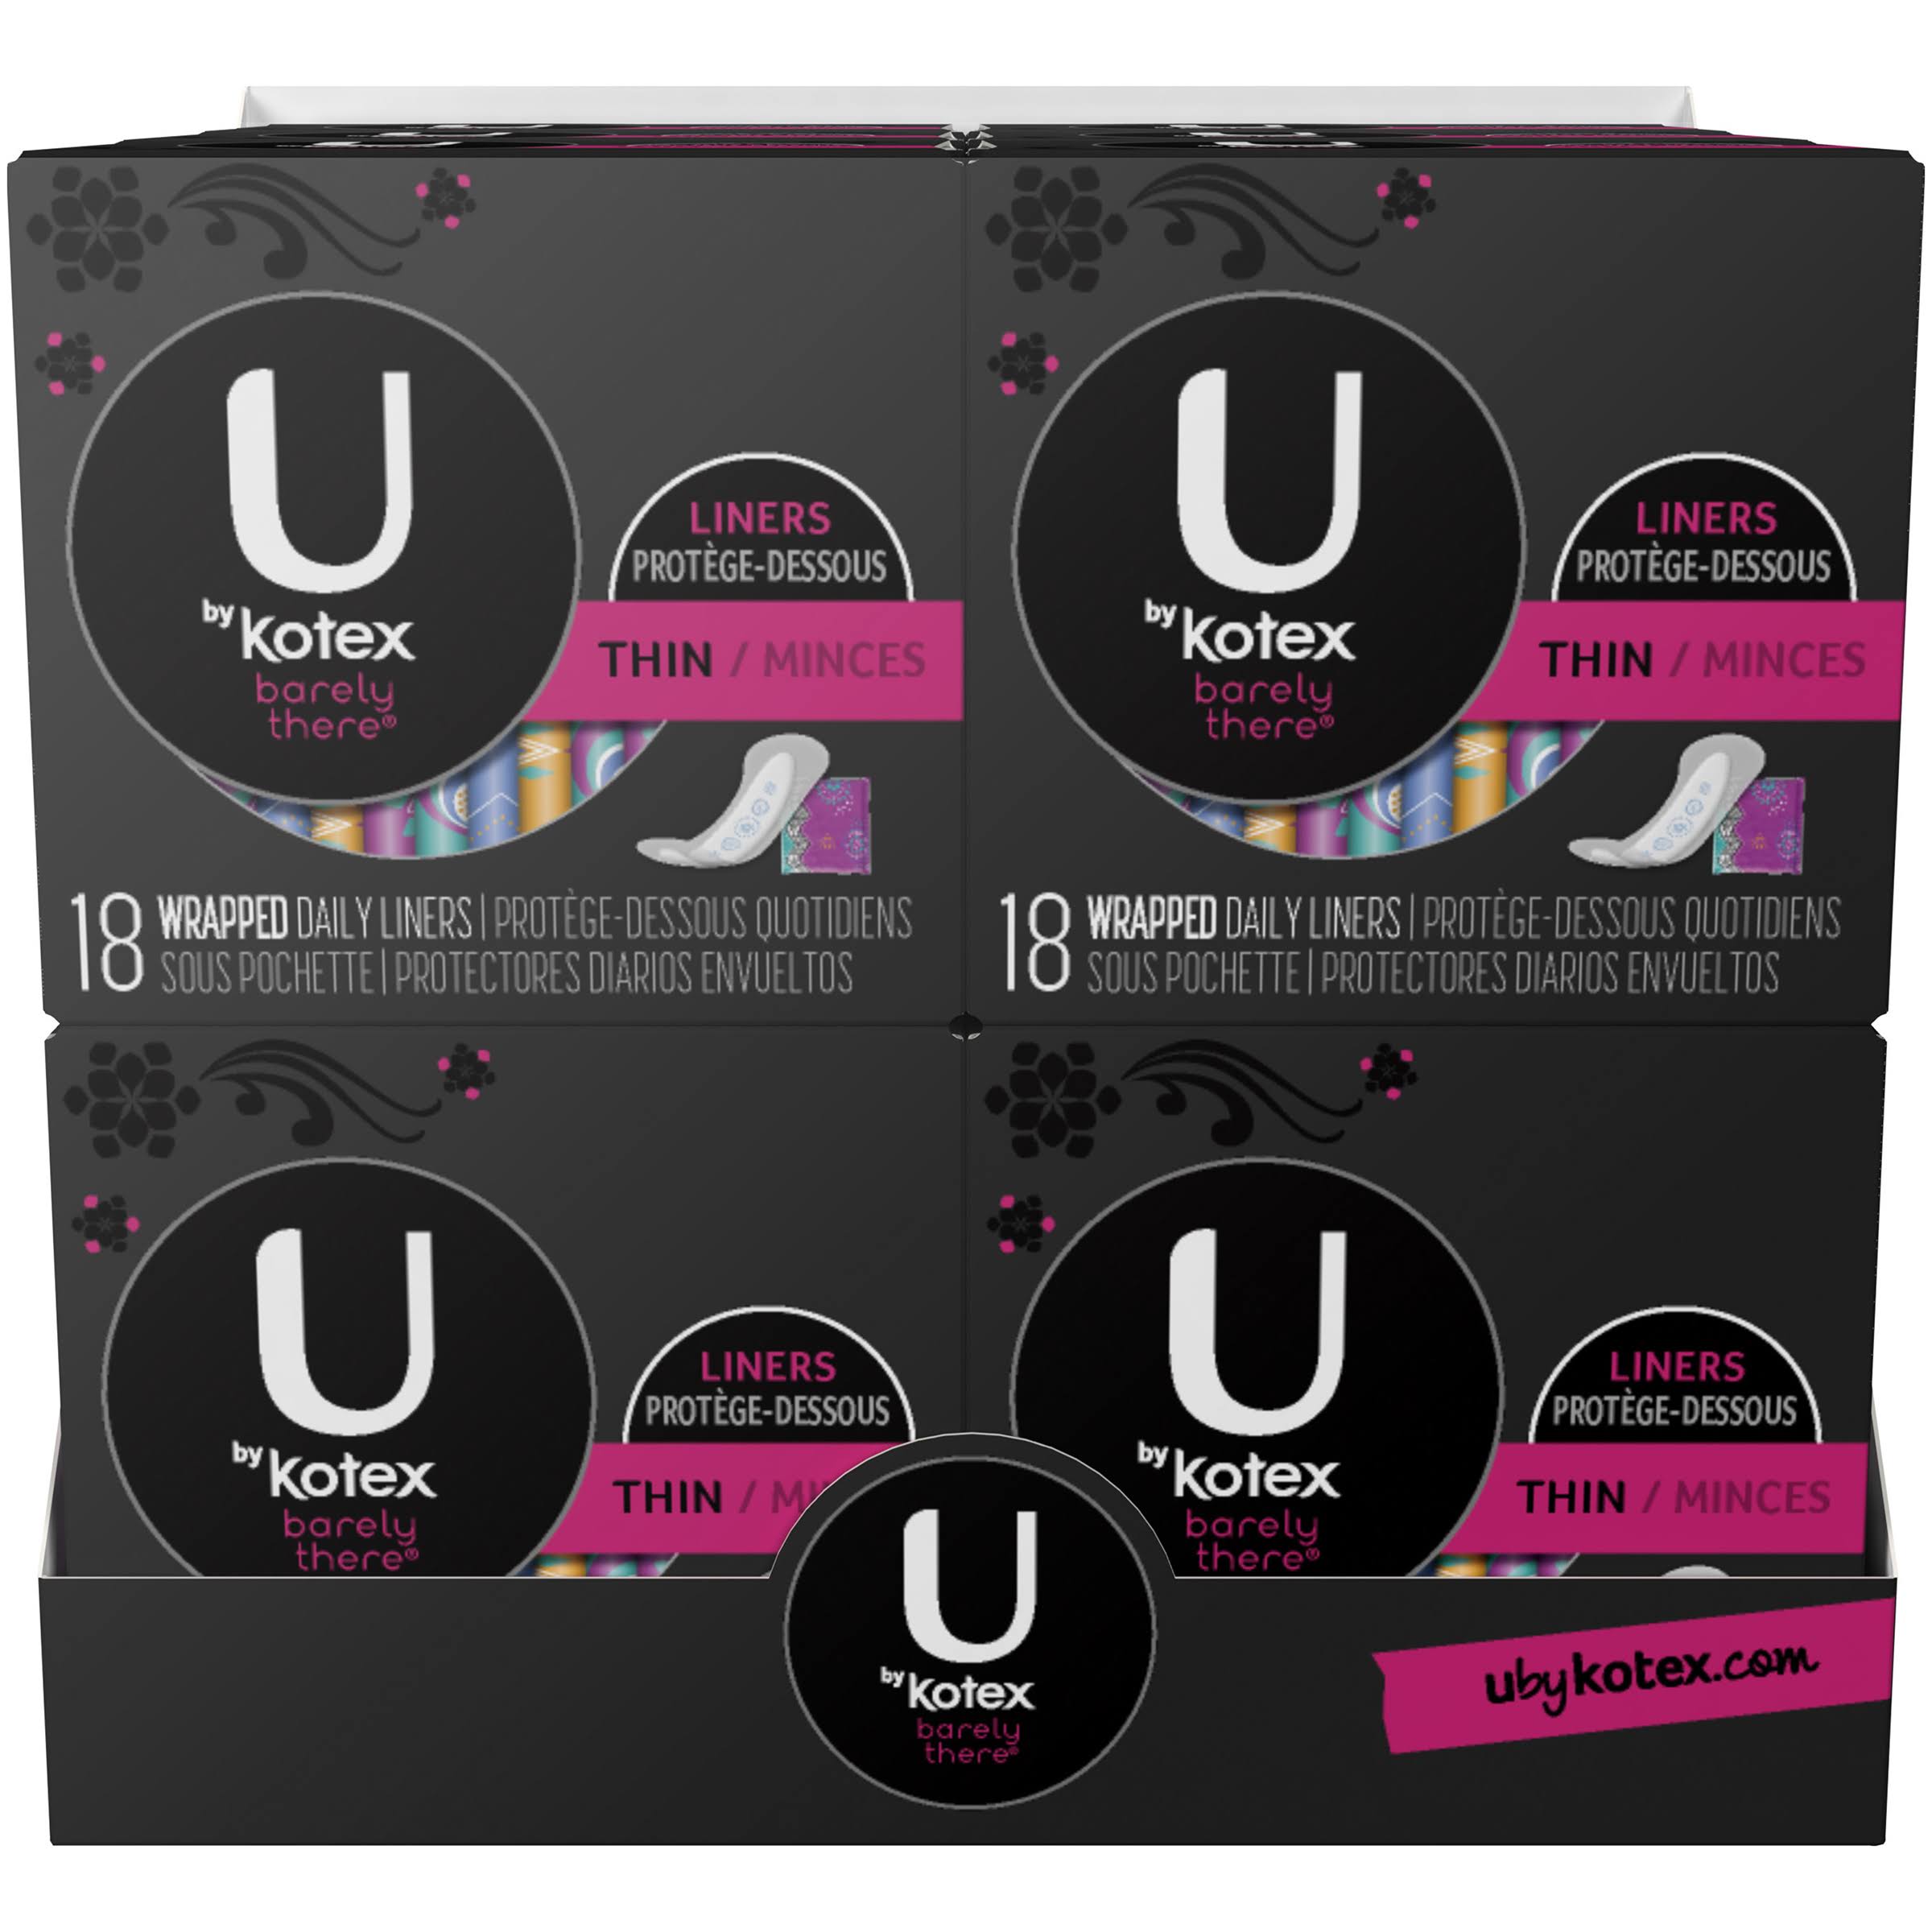 U by Kotex Barely There Liners, Light Absorbency, Unscented